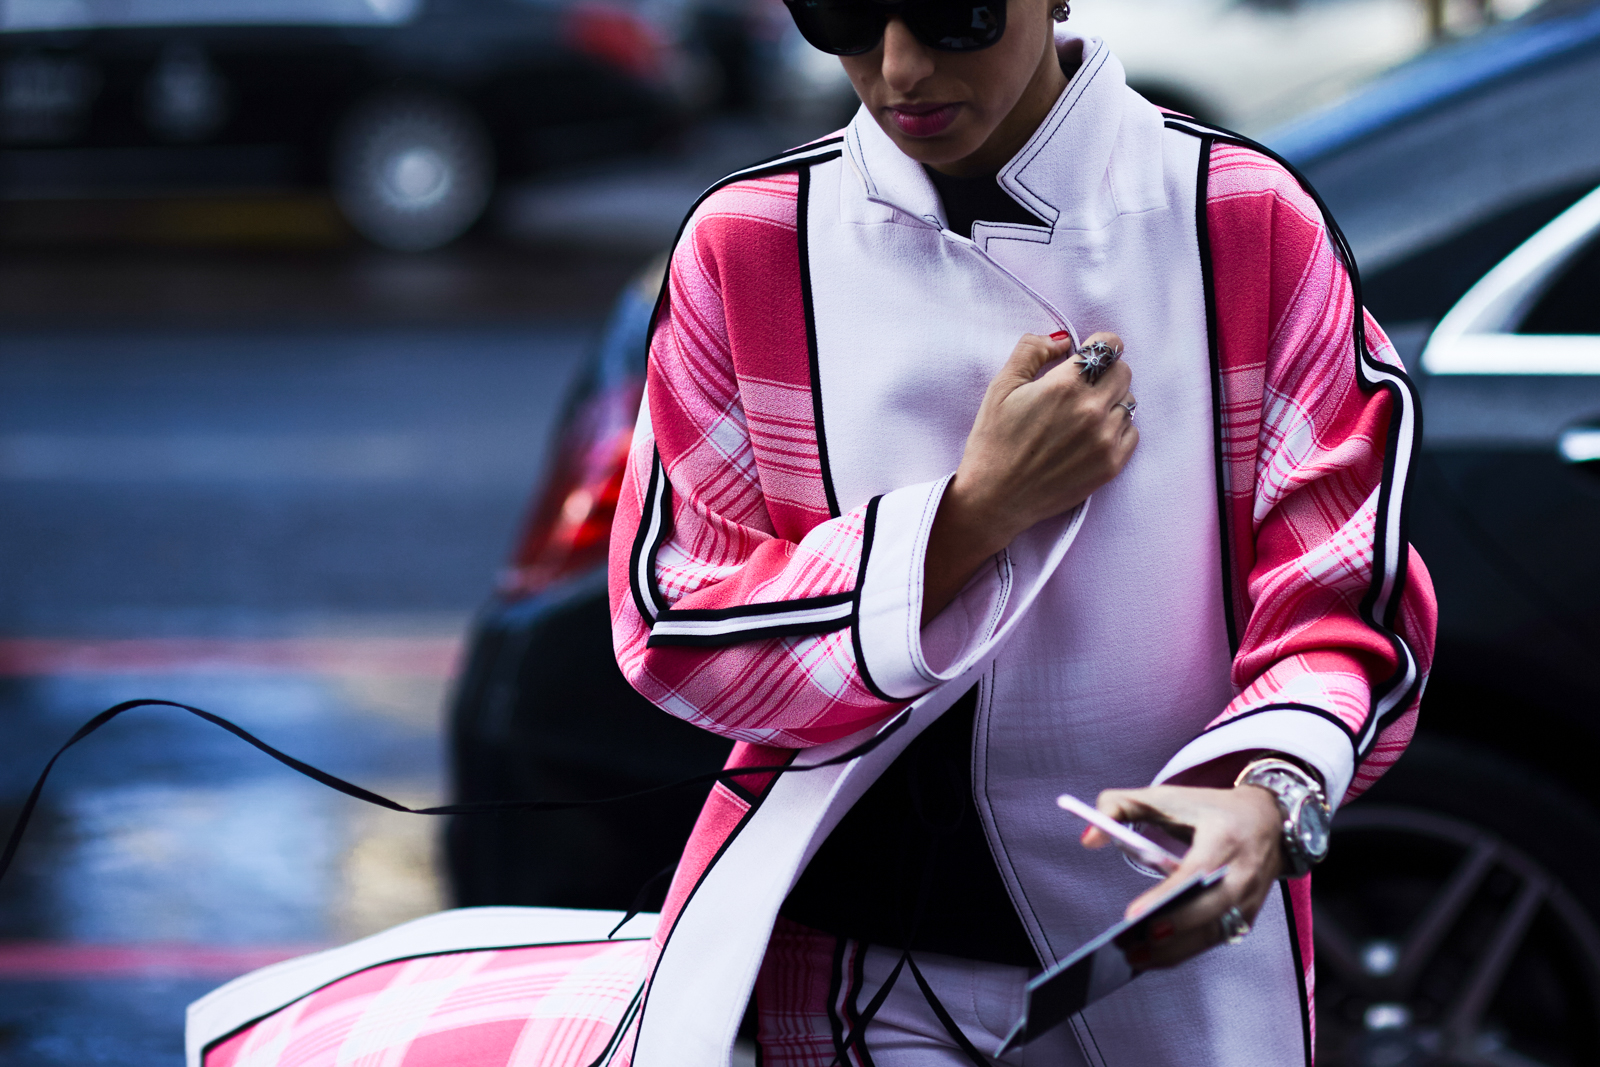 PFW Street Style: Deena Abdulaziz wearing a pink check coat by Acne Studios before a fashion show in Paris, France